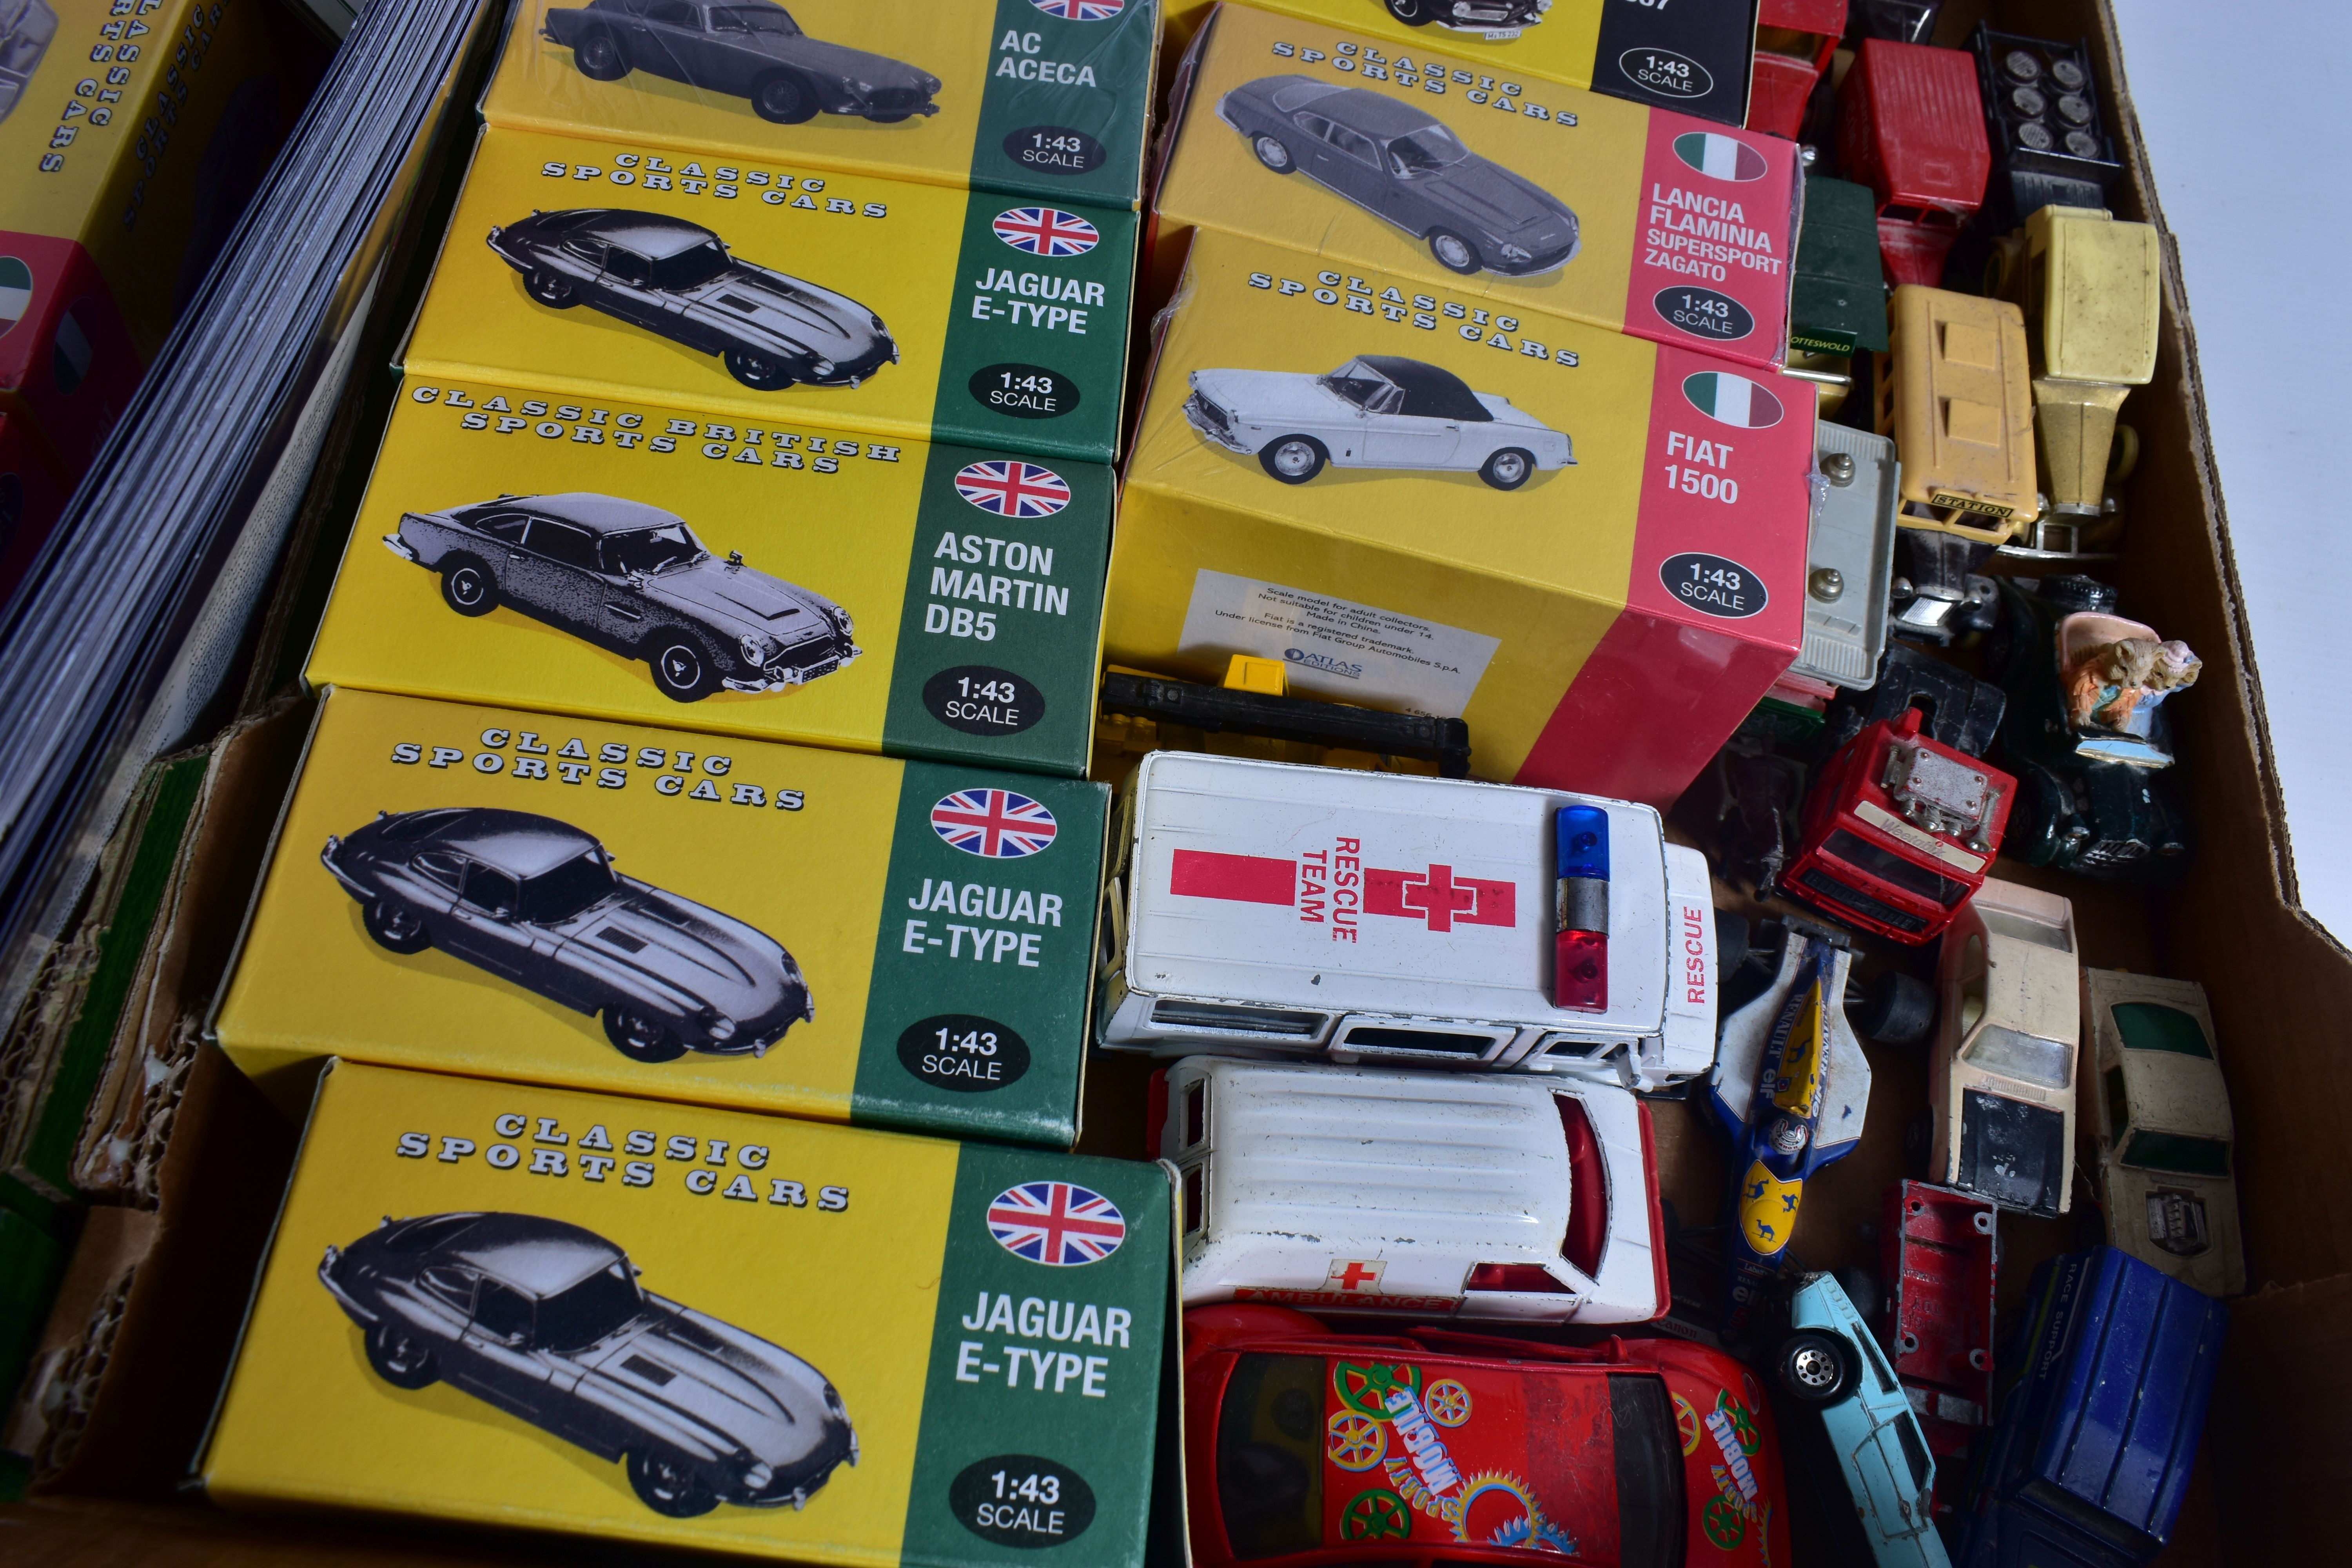 A QUANTITY OF BOXED ATLAS EDITIONS CLASSIC SPORTS CARS COLLECTION MODELS, 1:43 scale, many boxes - Image 8 of 9